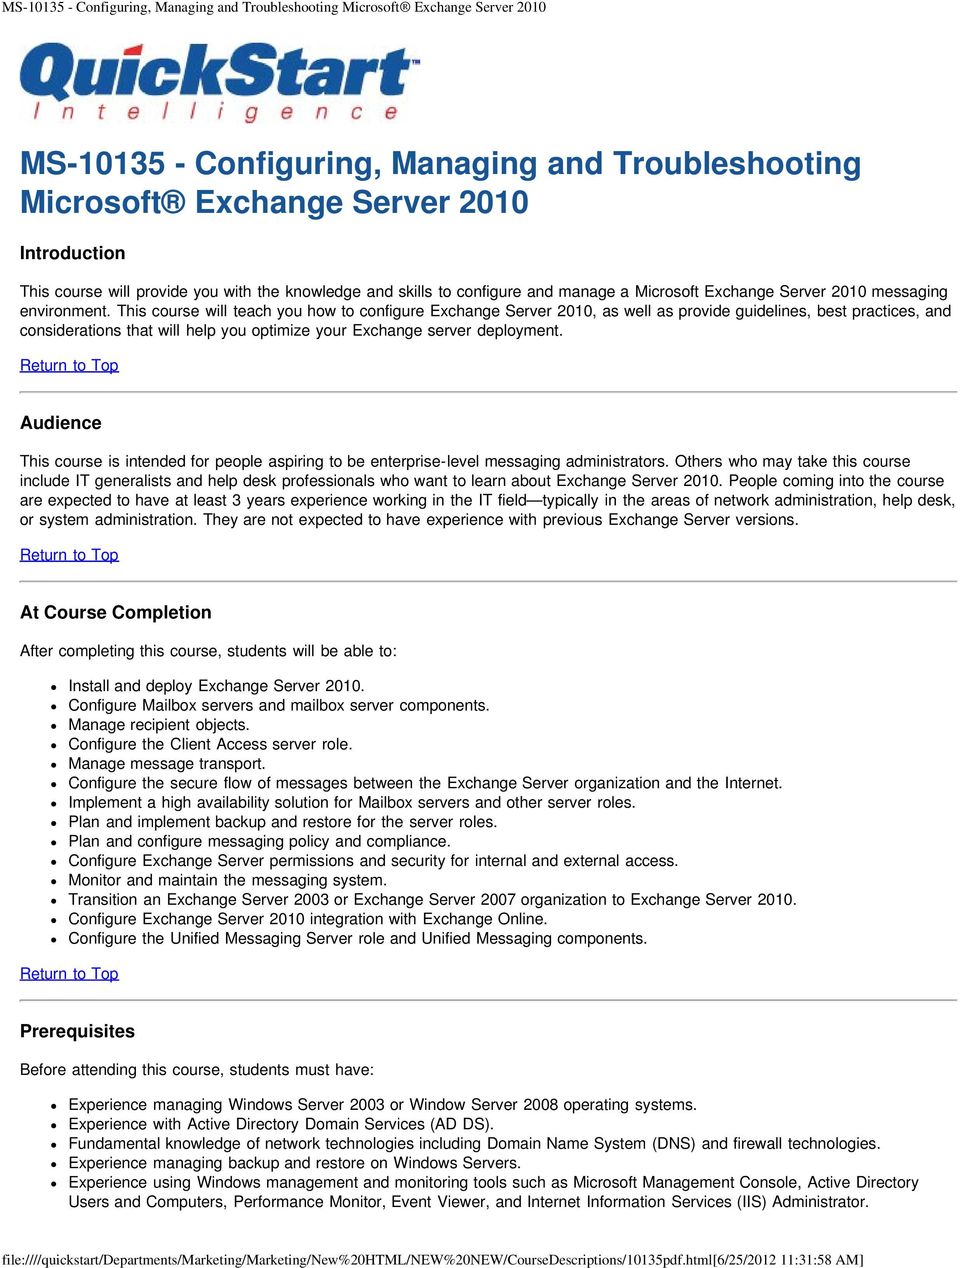 This course will teach you how to configure Exchange Server 2010, as well as provide guidelines, best practices, and considerations that will help you optimize your Exchange server deployment.